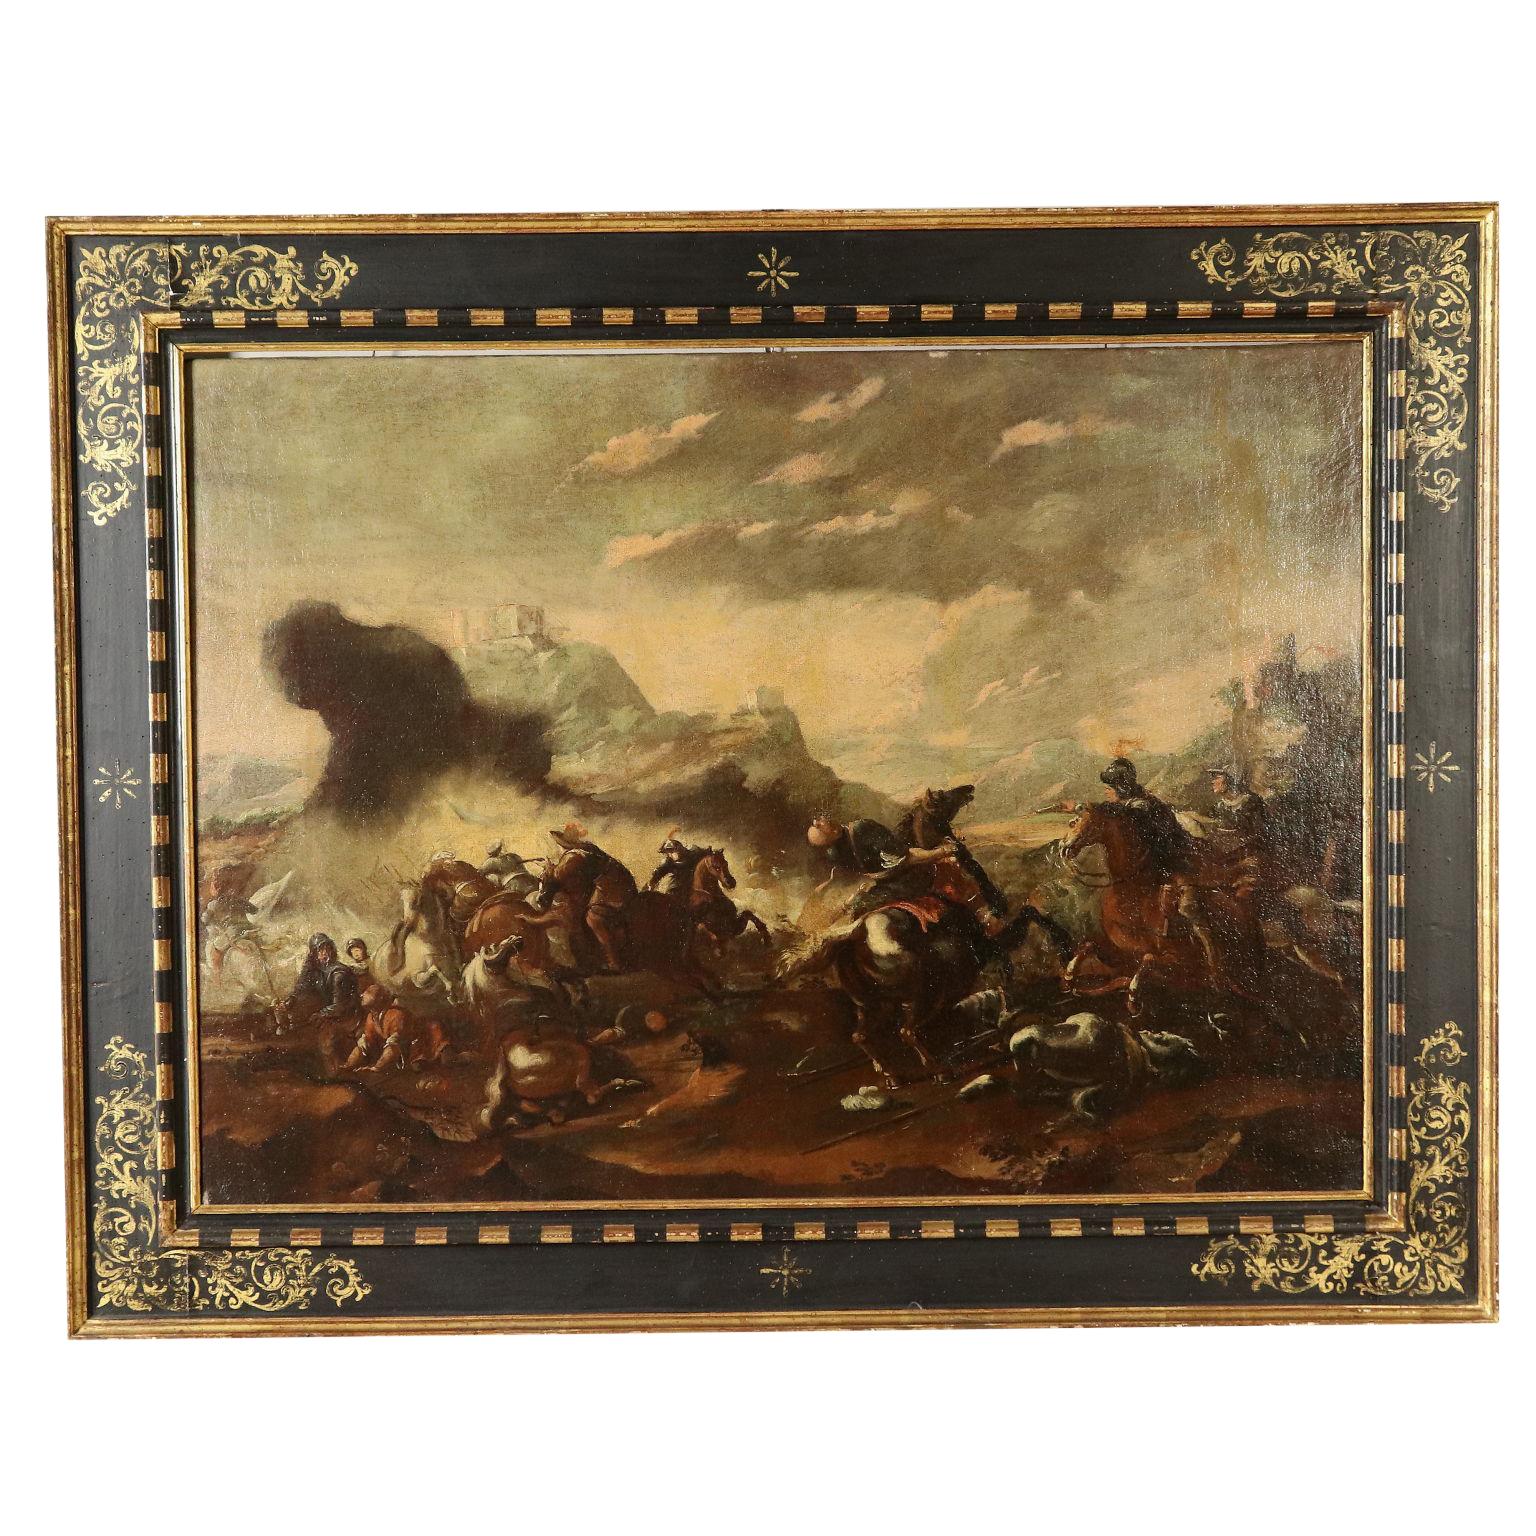 Unknown Landscape Painting - Battle Scene Oil on Canvas Late 17th Century